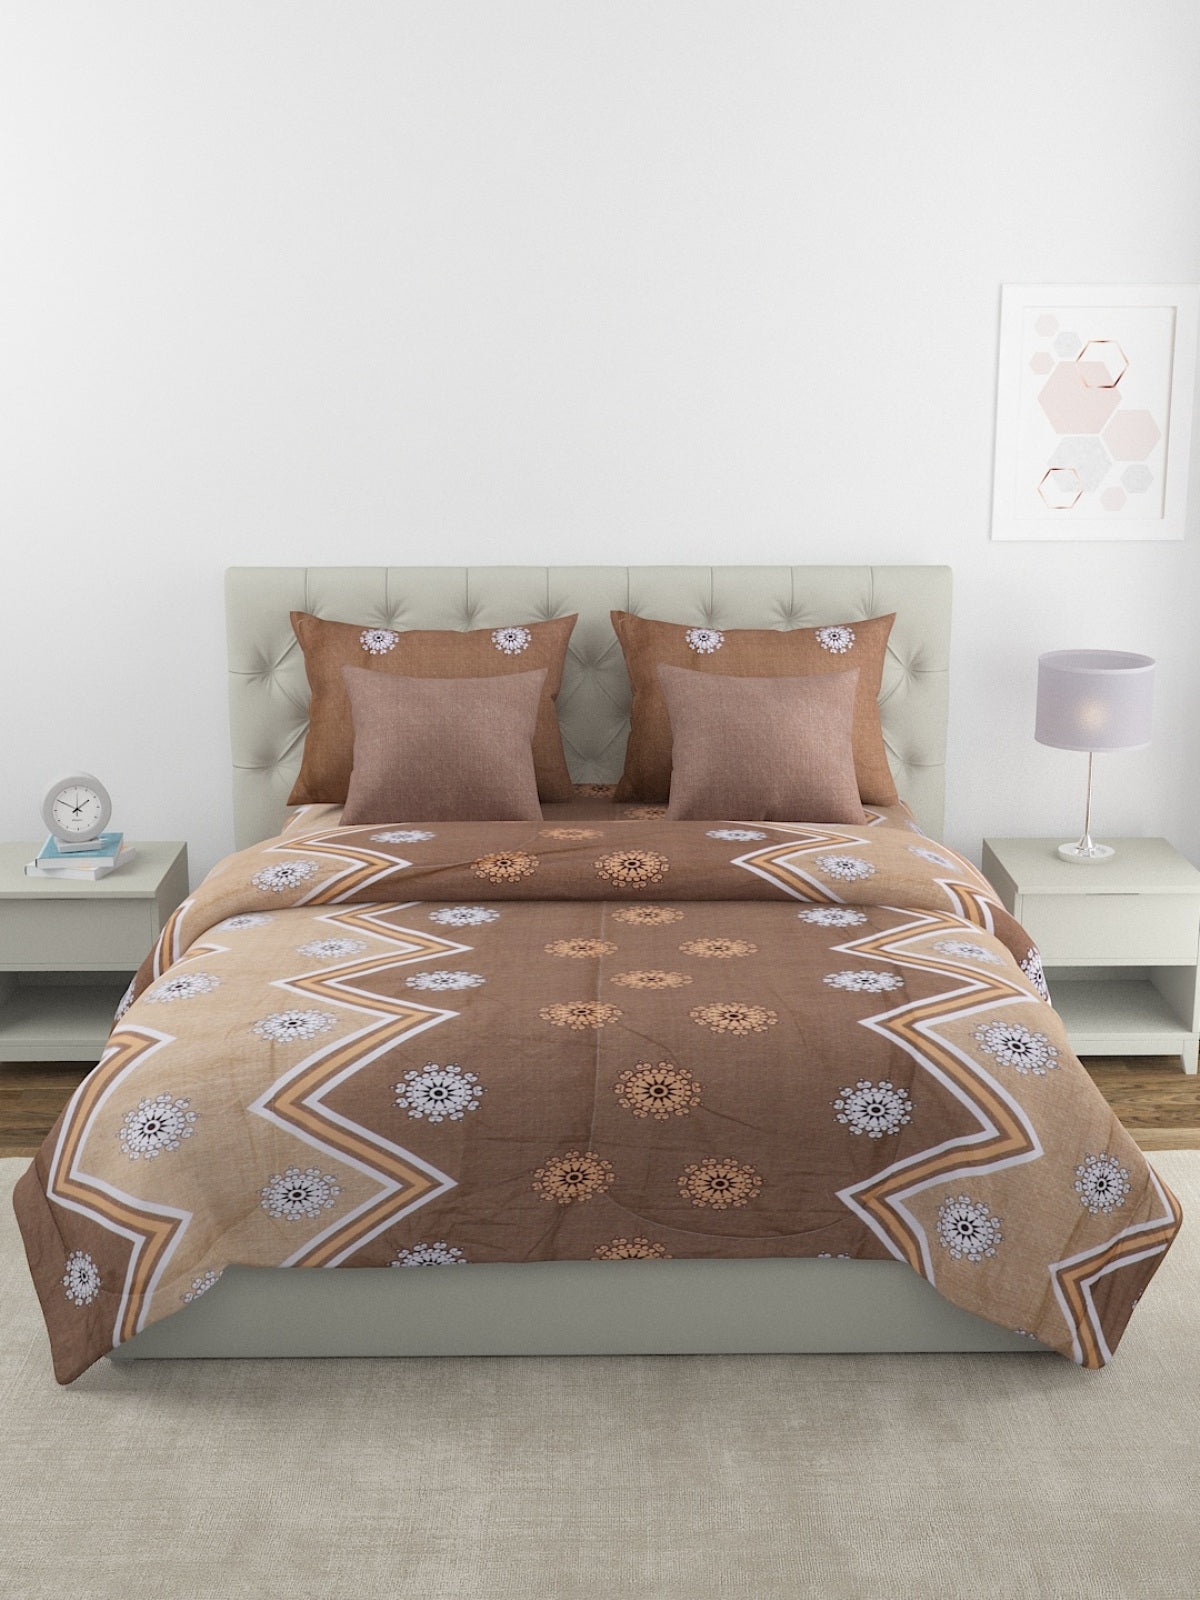 Brown & Beige Bedding Set 1 Bedsheet with 2 Pillow Covers , 1 Quilt/Blanket